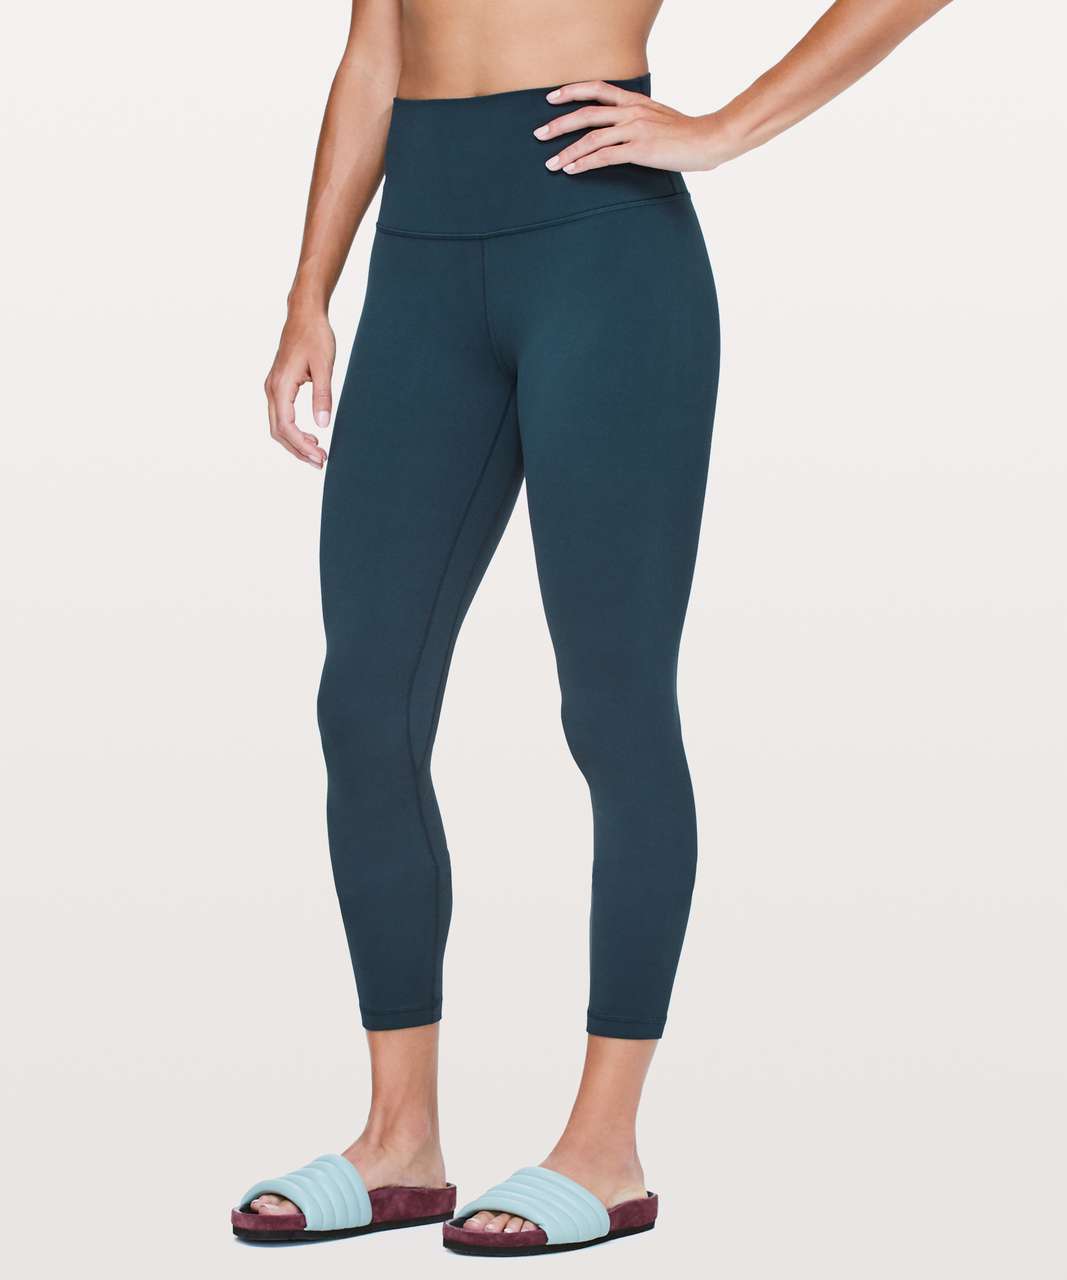 Lululemon  Cool Racerback II in Nocturnal Teal Size 4 - $30 - From Morgan